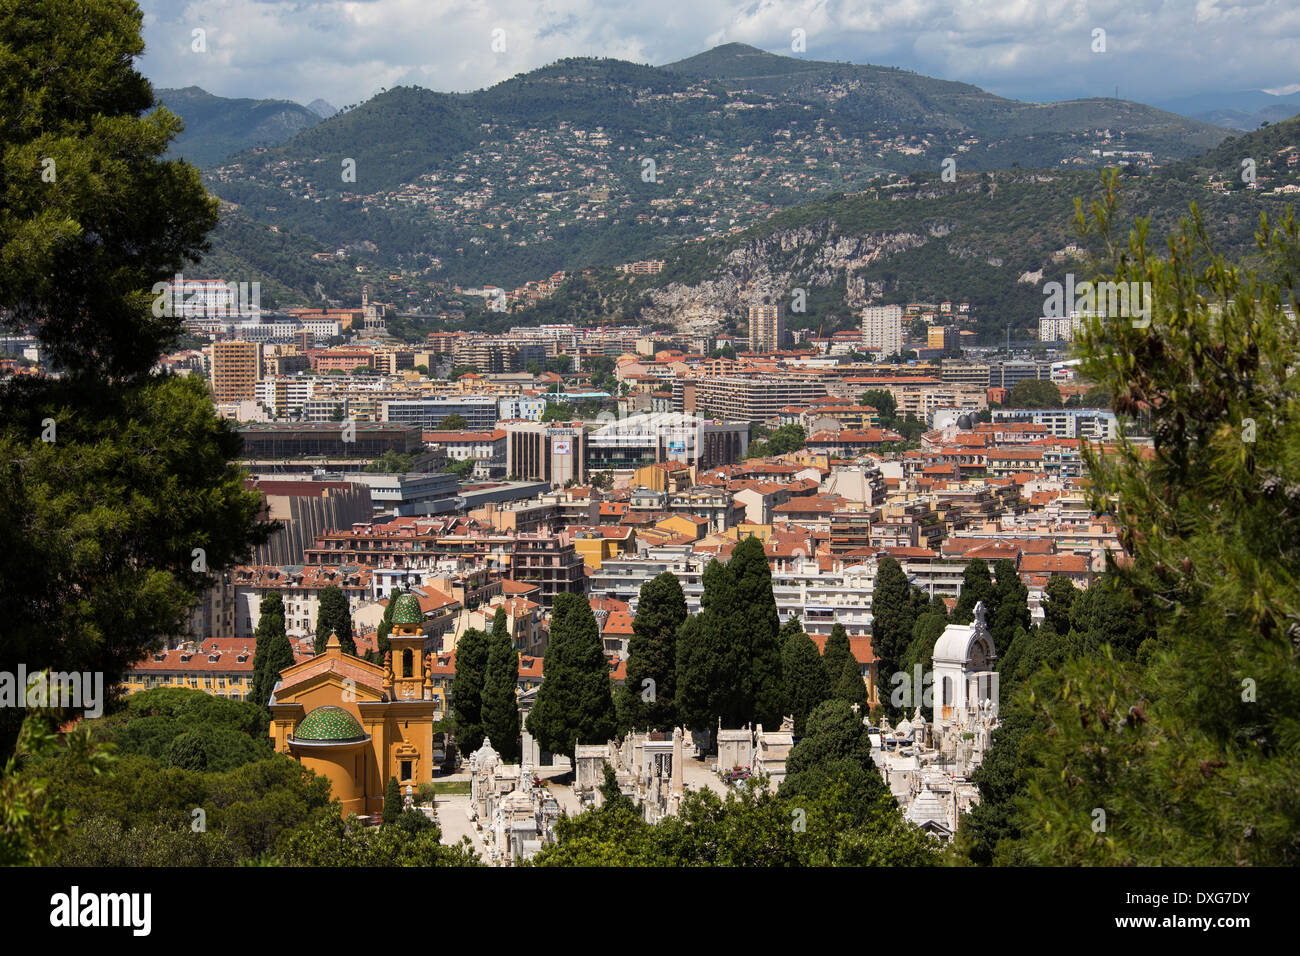 Overview of the city of Nice on the French Riviera in the South of France. Stock Photo